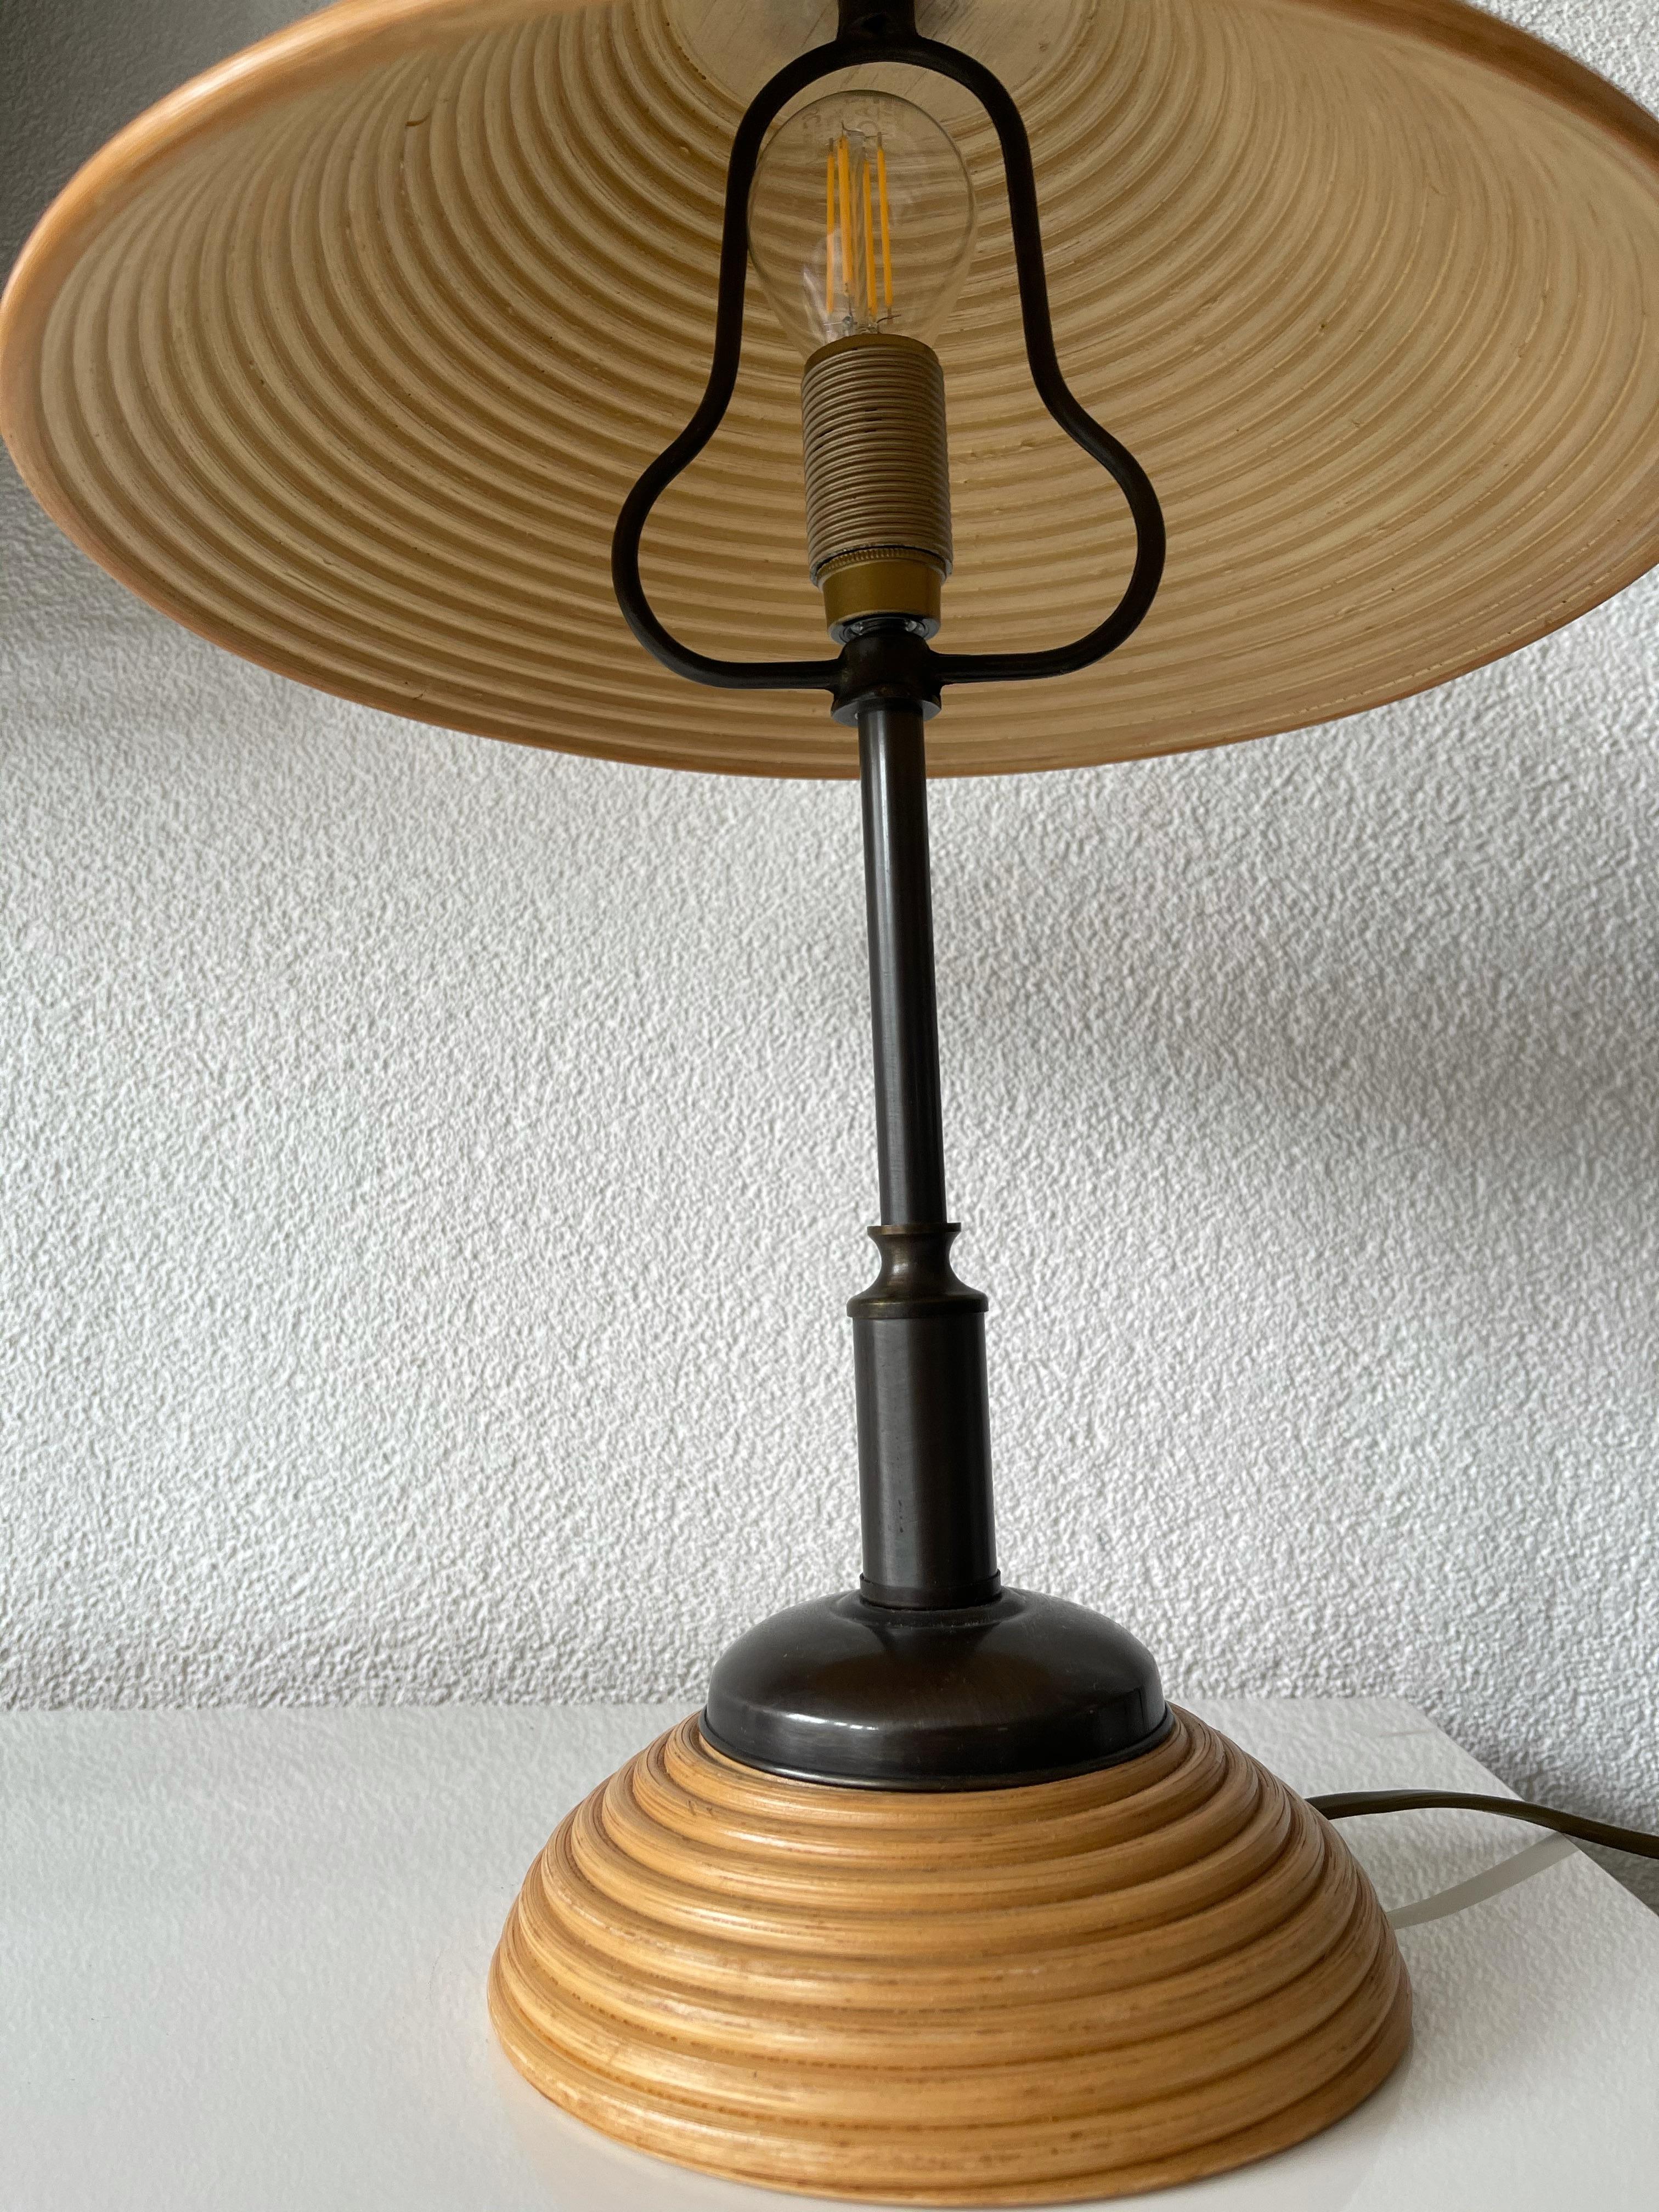 Rare & Stylish, Handcrafted Mid-Century Modern Rattan & Brass Table or Desk Lamp 5